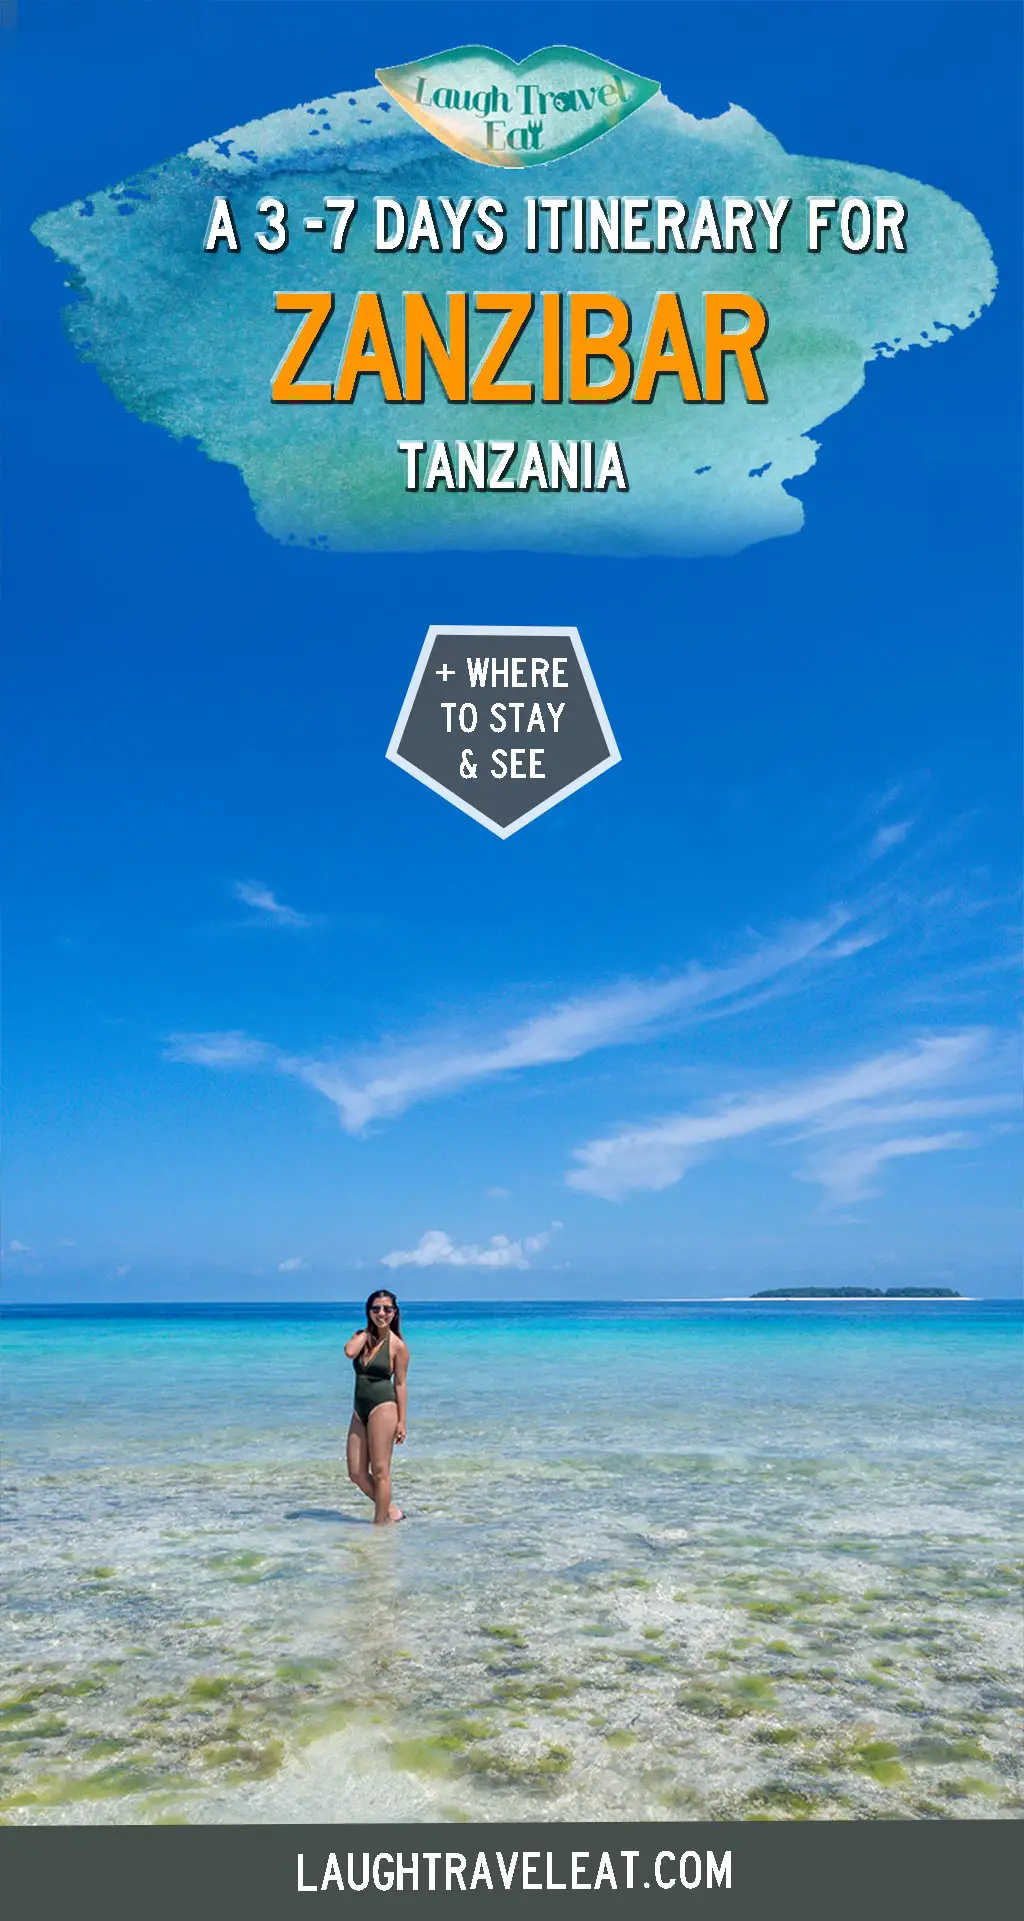 Zanzibar has long been an island of spice and trade even before becoming part of Tanzania. Most itinerary for Tanzania will include this island, not only because of its history but because of its beautiful beaches. Whether you are looking to spend a few days in Zanzibar or a week to relax and unwind, I’ve got some suggestions for you: #Zanzibar #Tanzania #Afirca